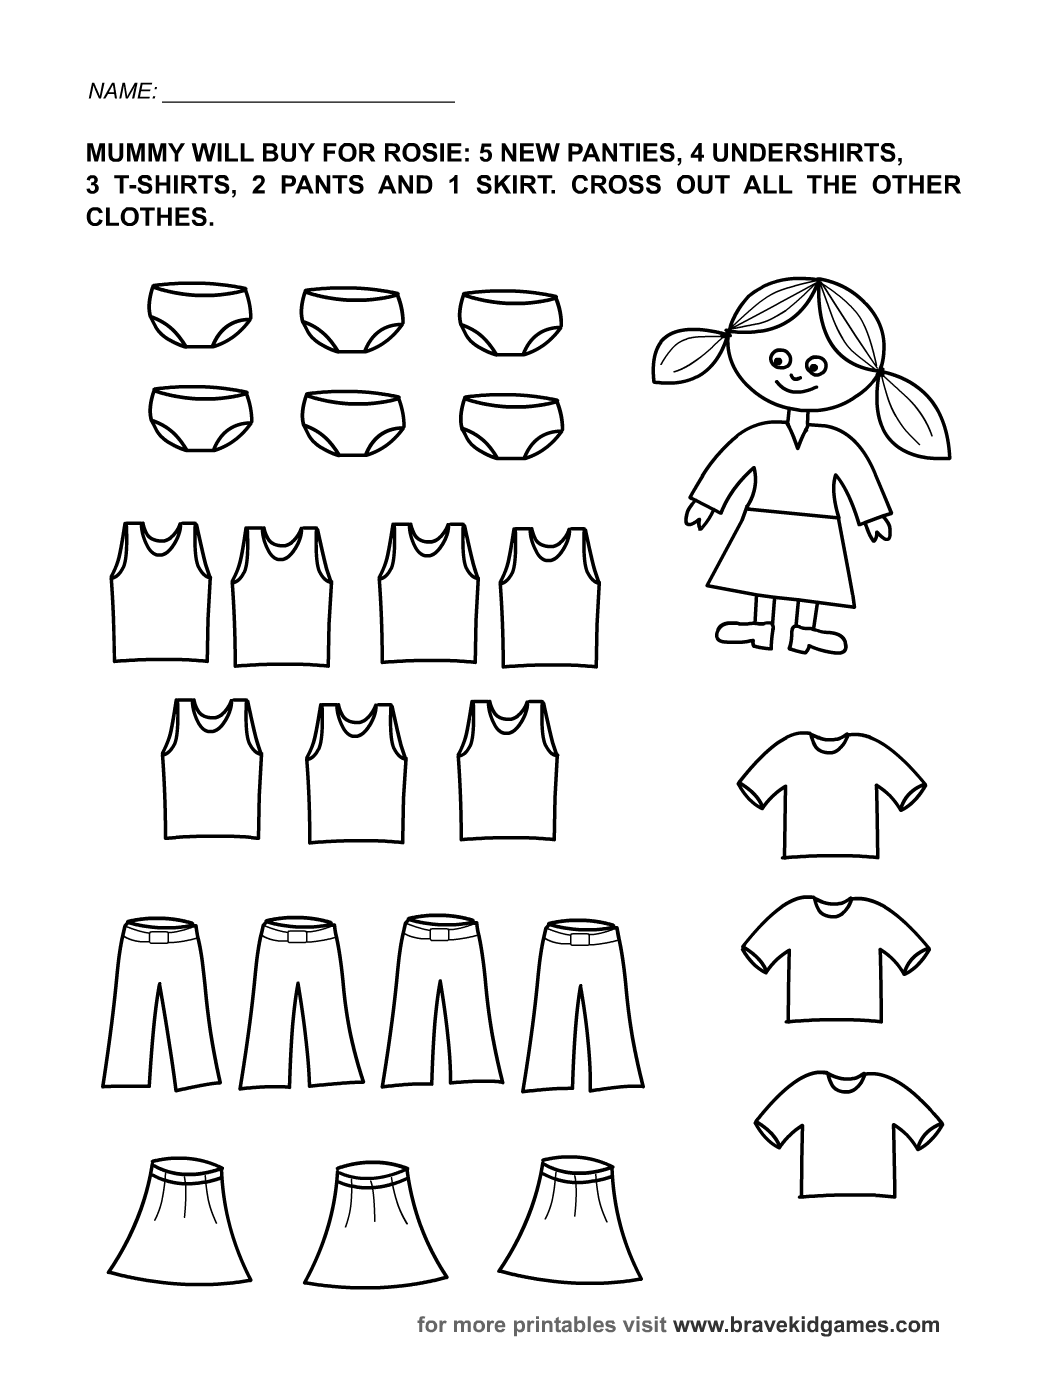 worksheet-for-toddlers-age-2-alphabet-soup-toddler-sorting-activity